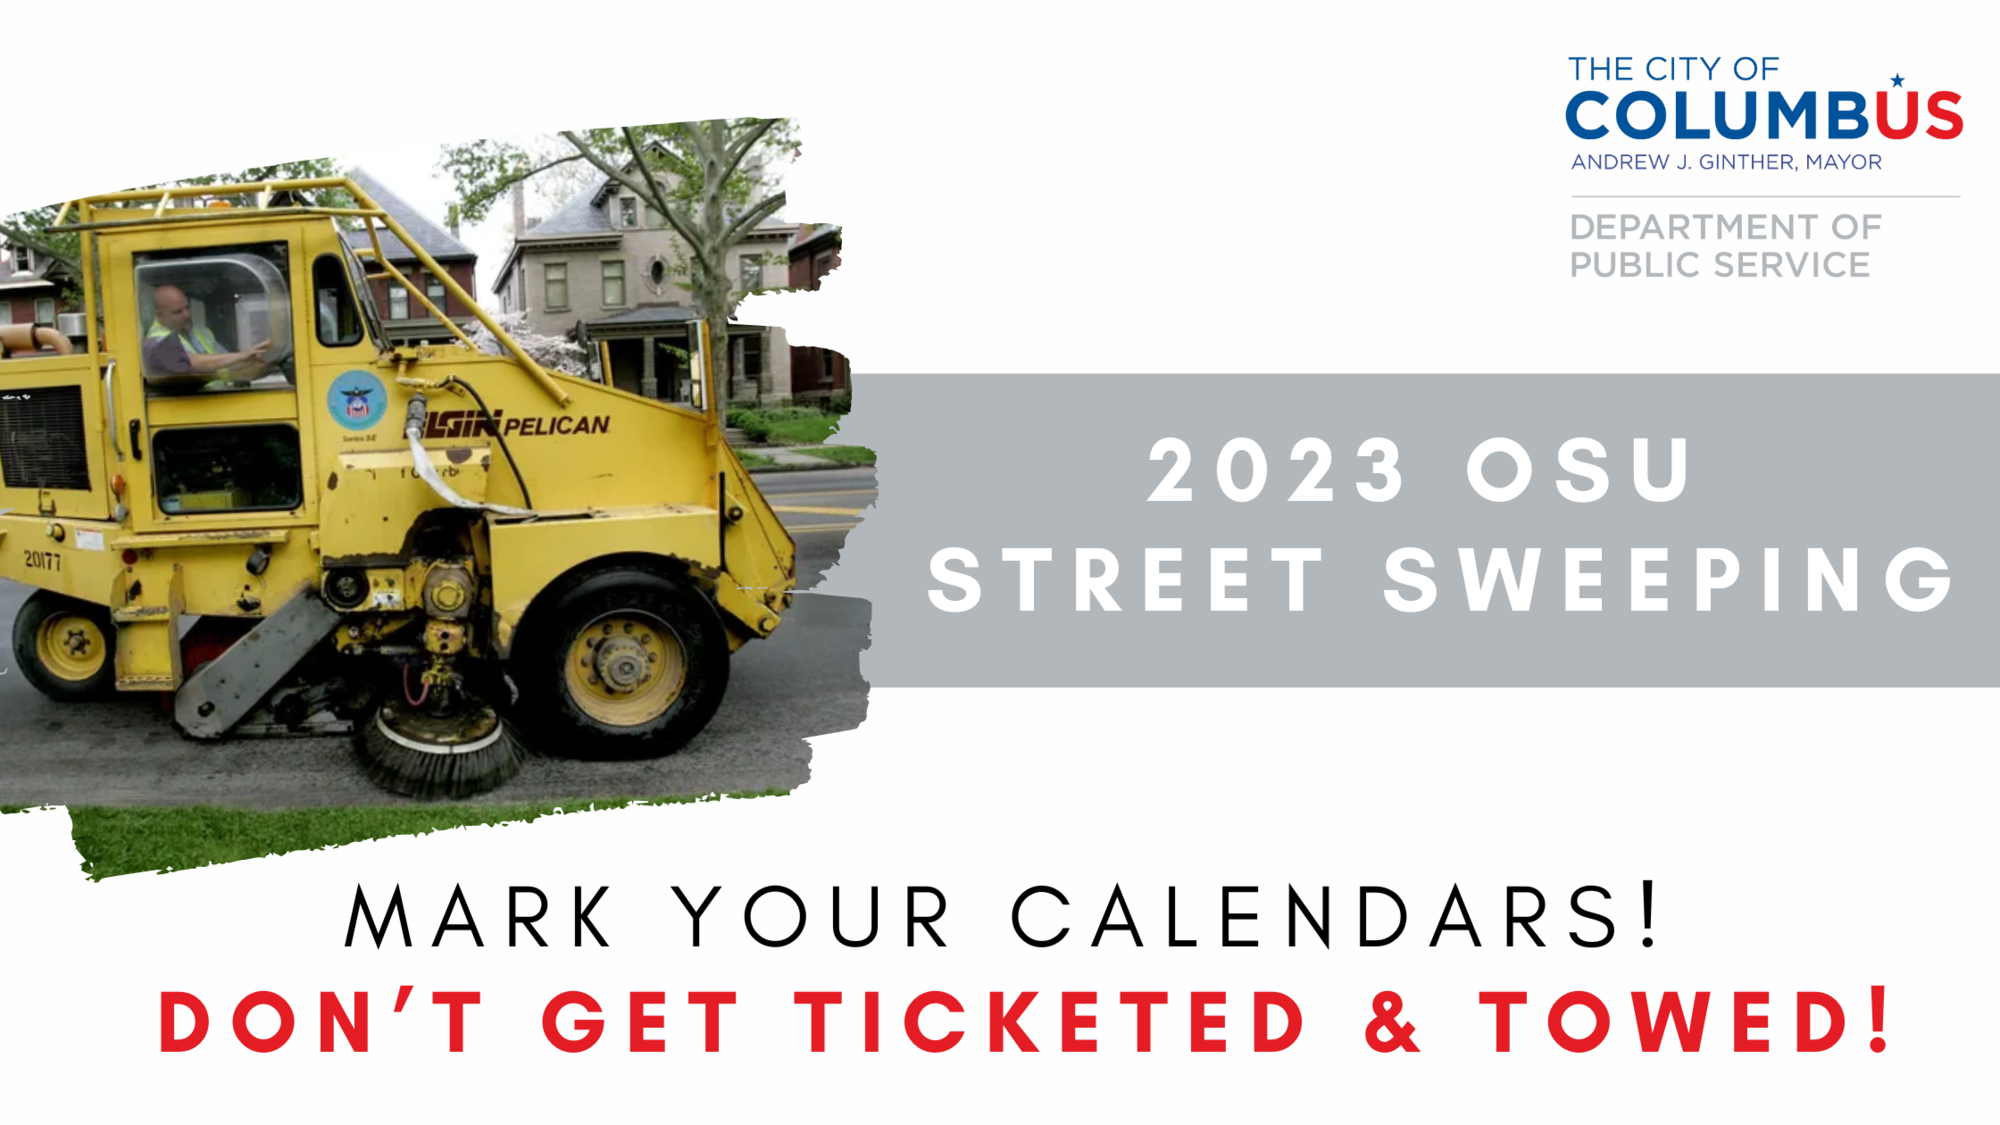 Street sweeping calendar for the University District is now posted r